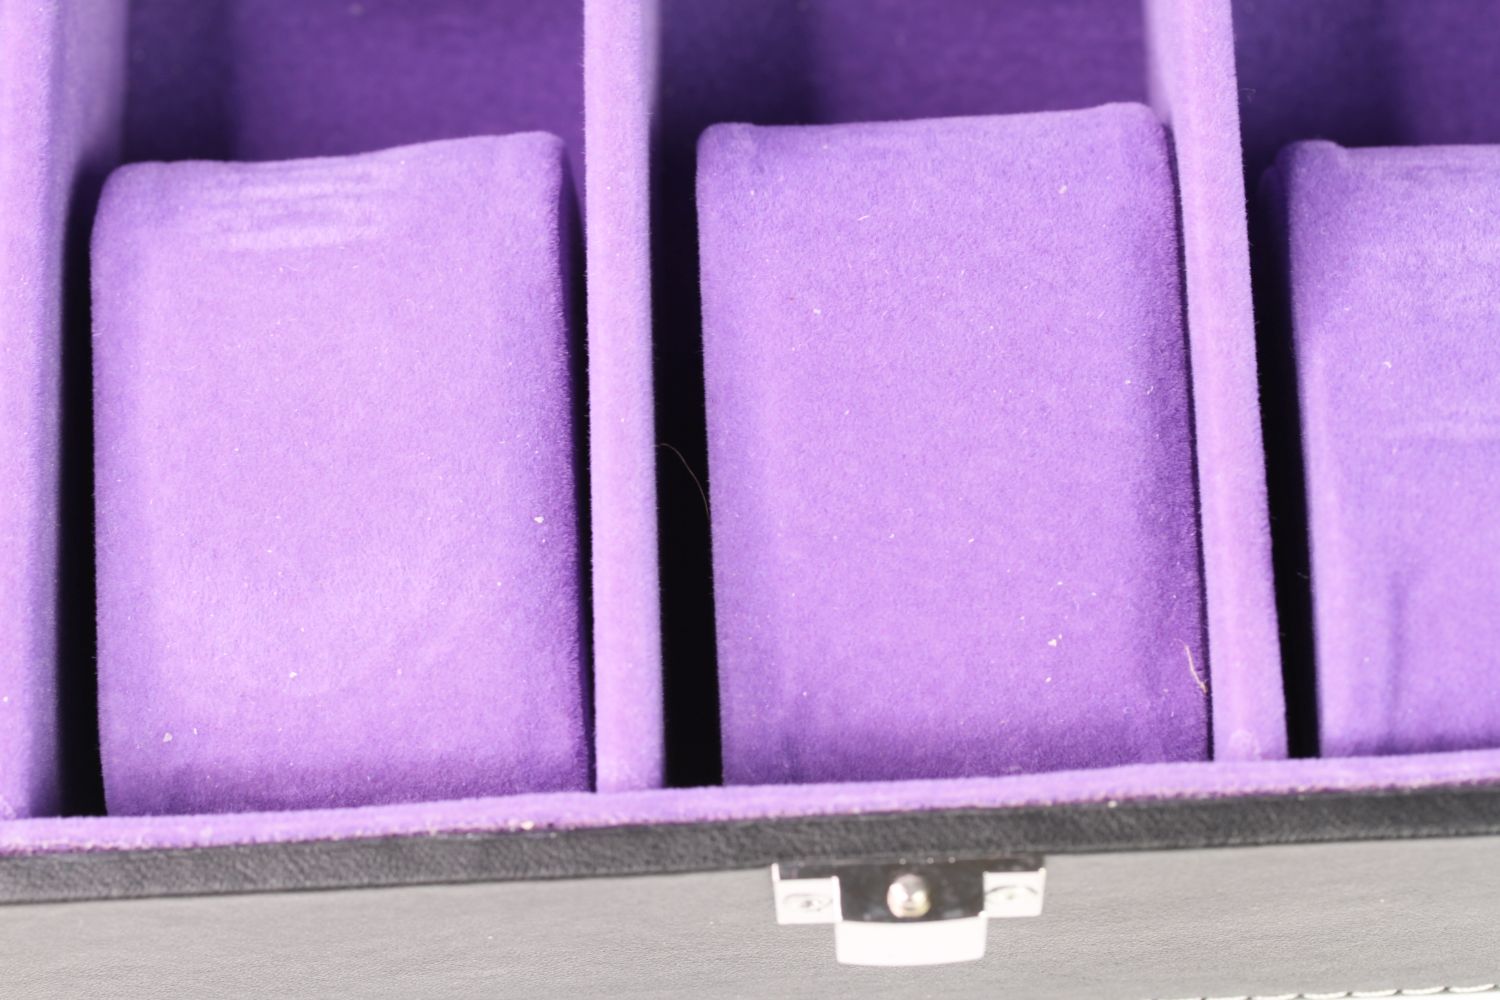 ASTON OF LONDON BLACK 5 PIECE WATCH BOX, 5 piece watch box, comes with 5 cushions, purple - Image 3 of 3